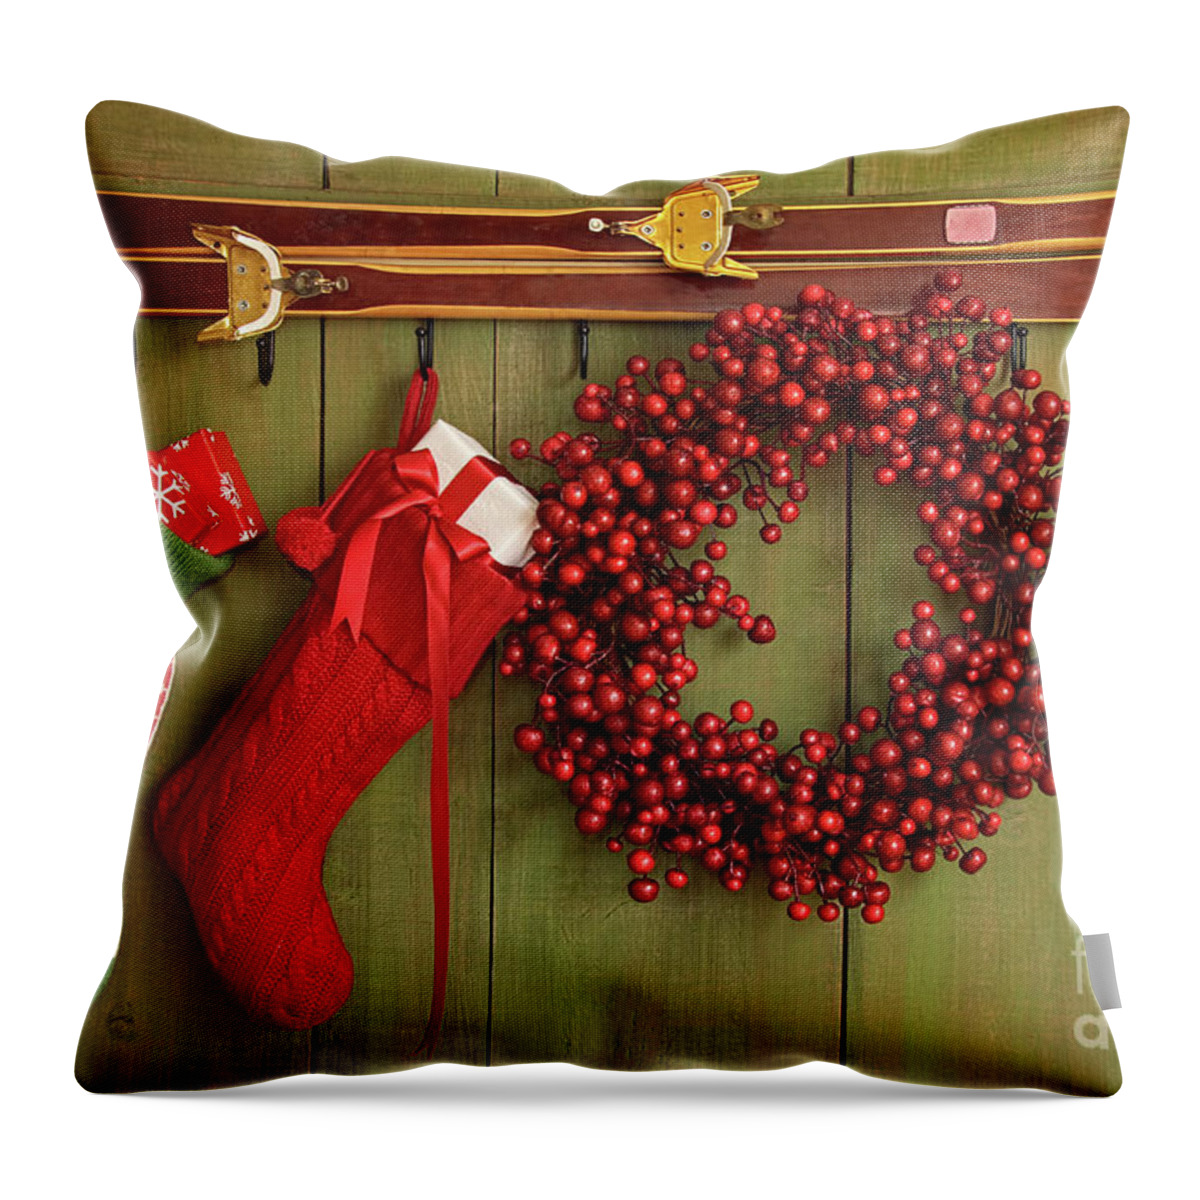 Antique Throw Pillow featuring the photograph Christmas stockings and wreath hanging on wall by Sandra Cunningham